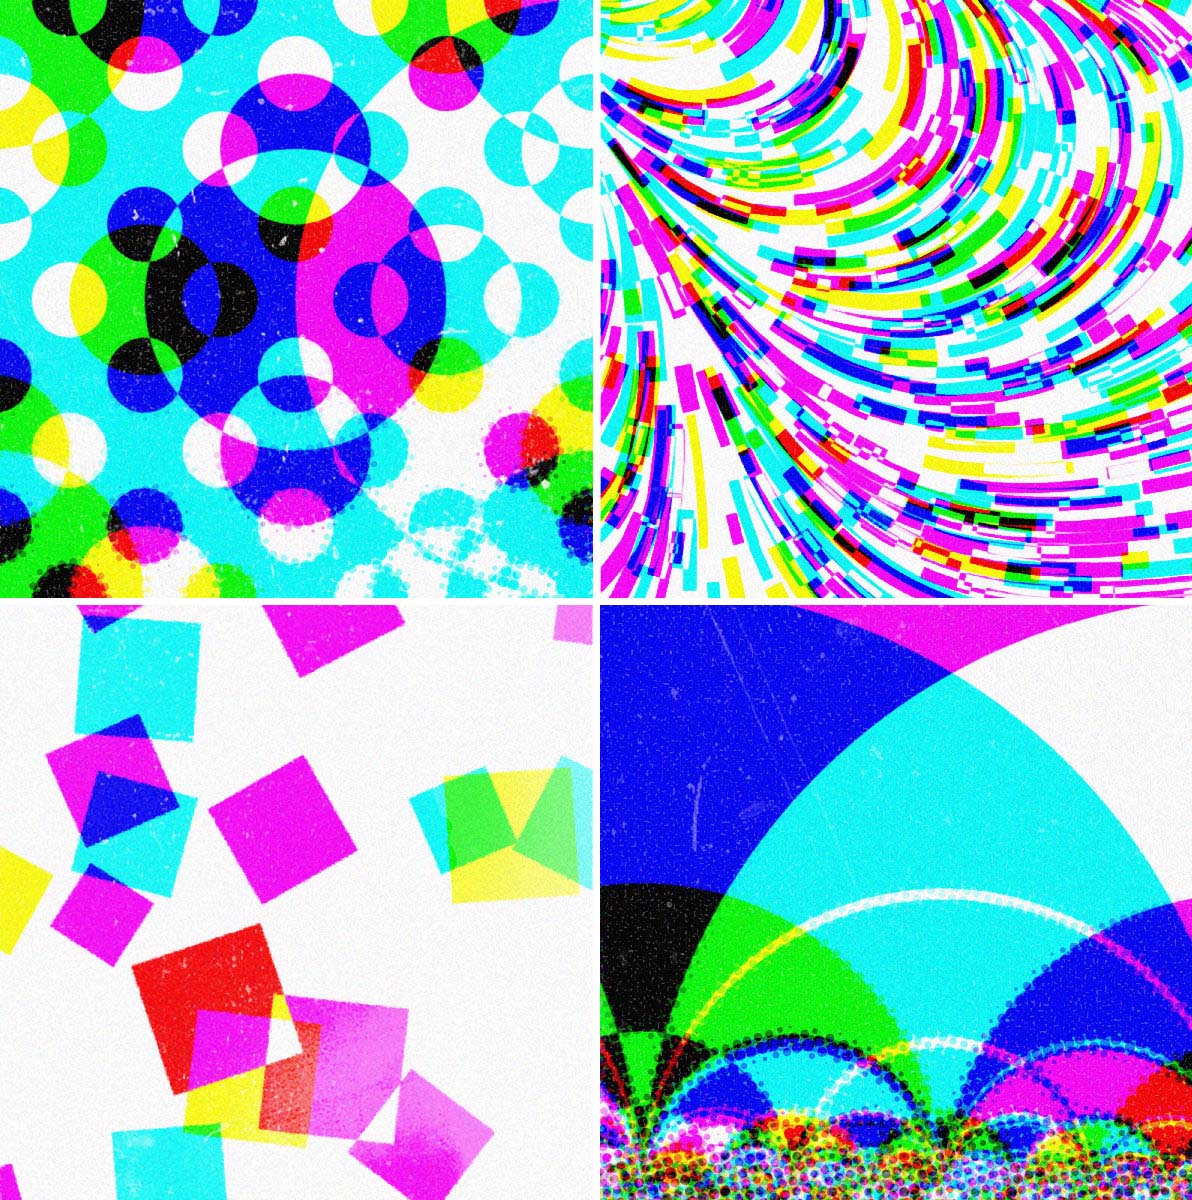 Row of 4 colourful patterns with circles, squares, and flow field lines